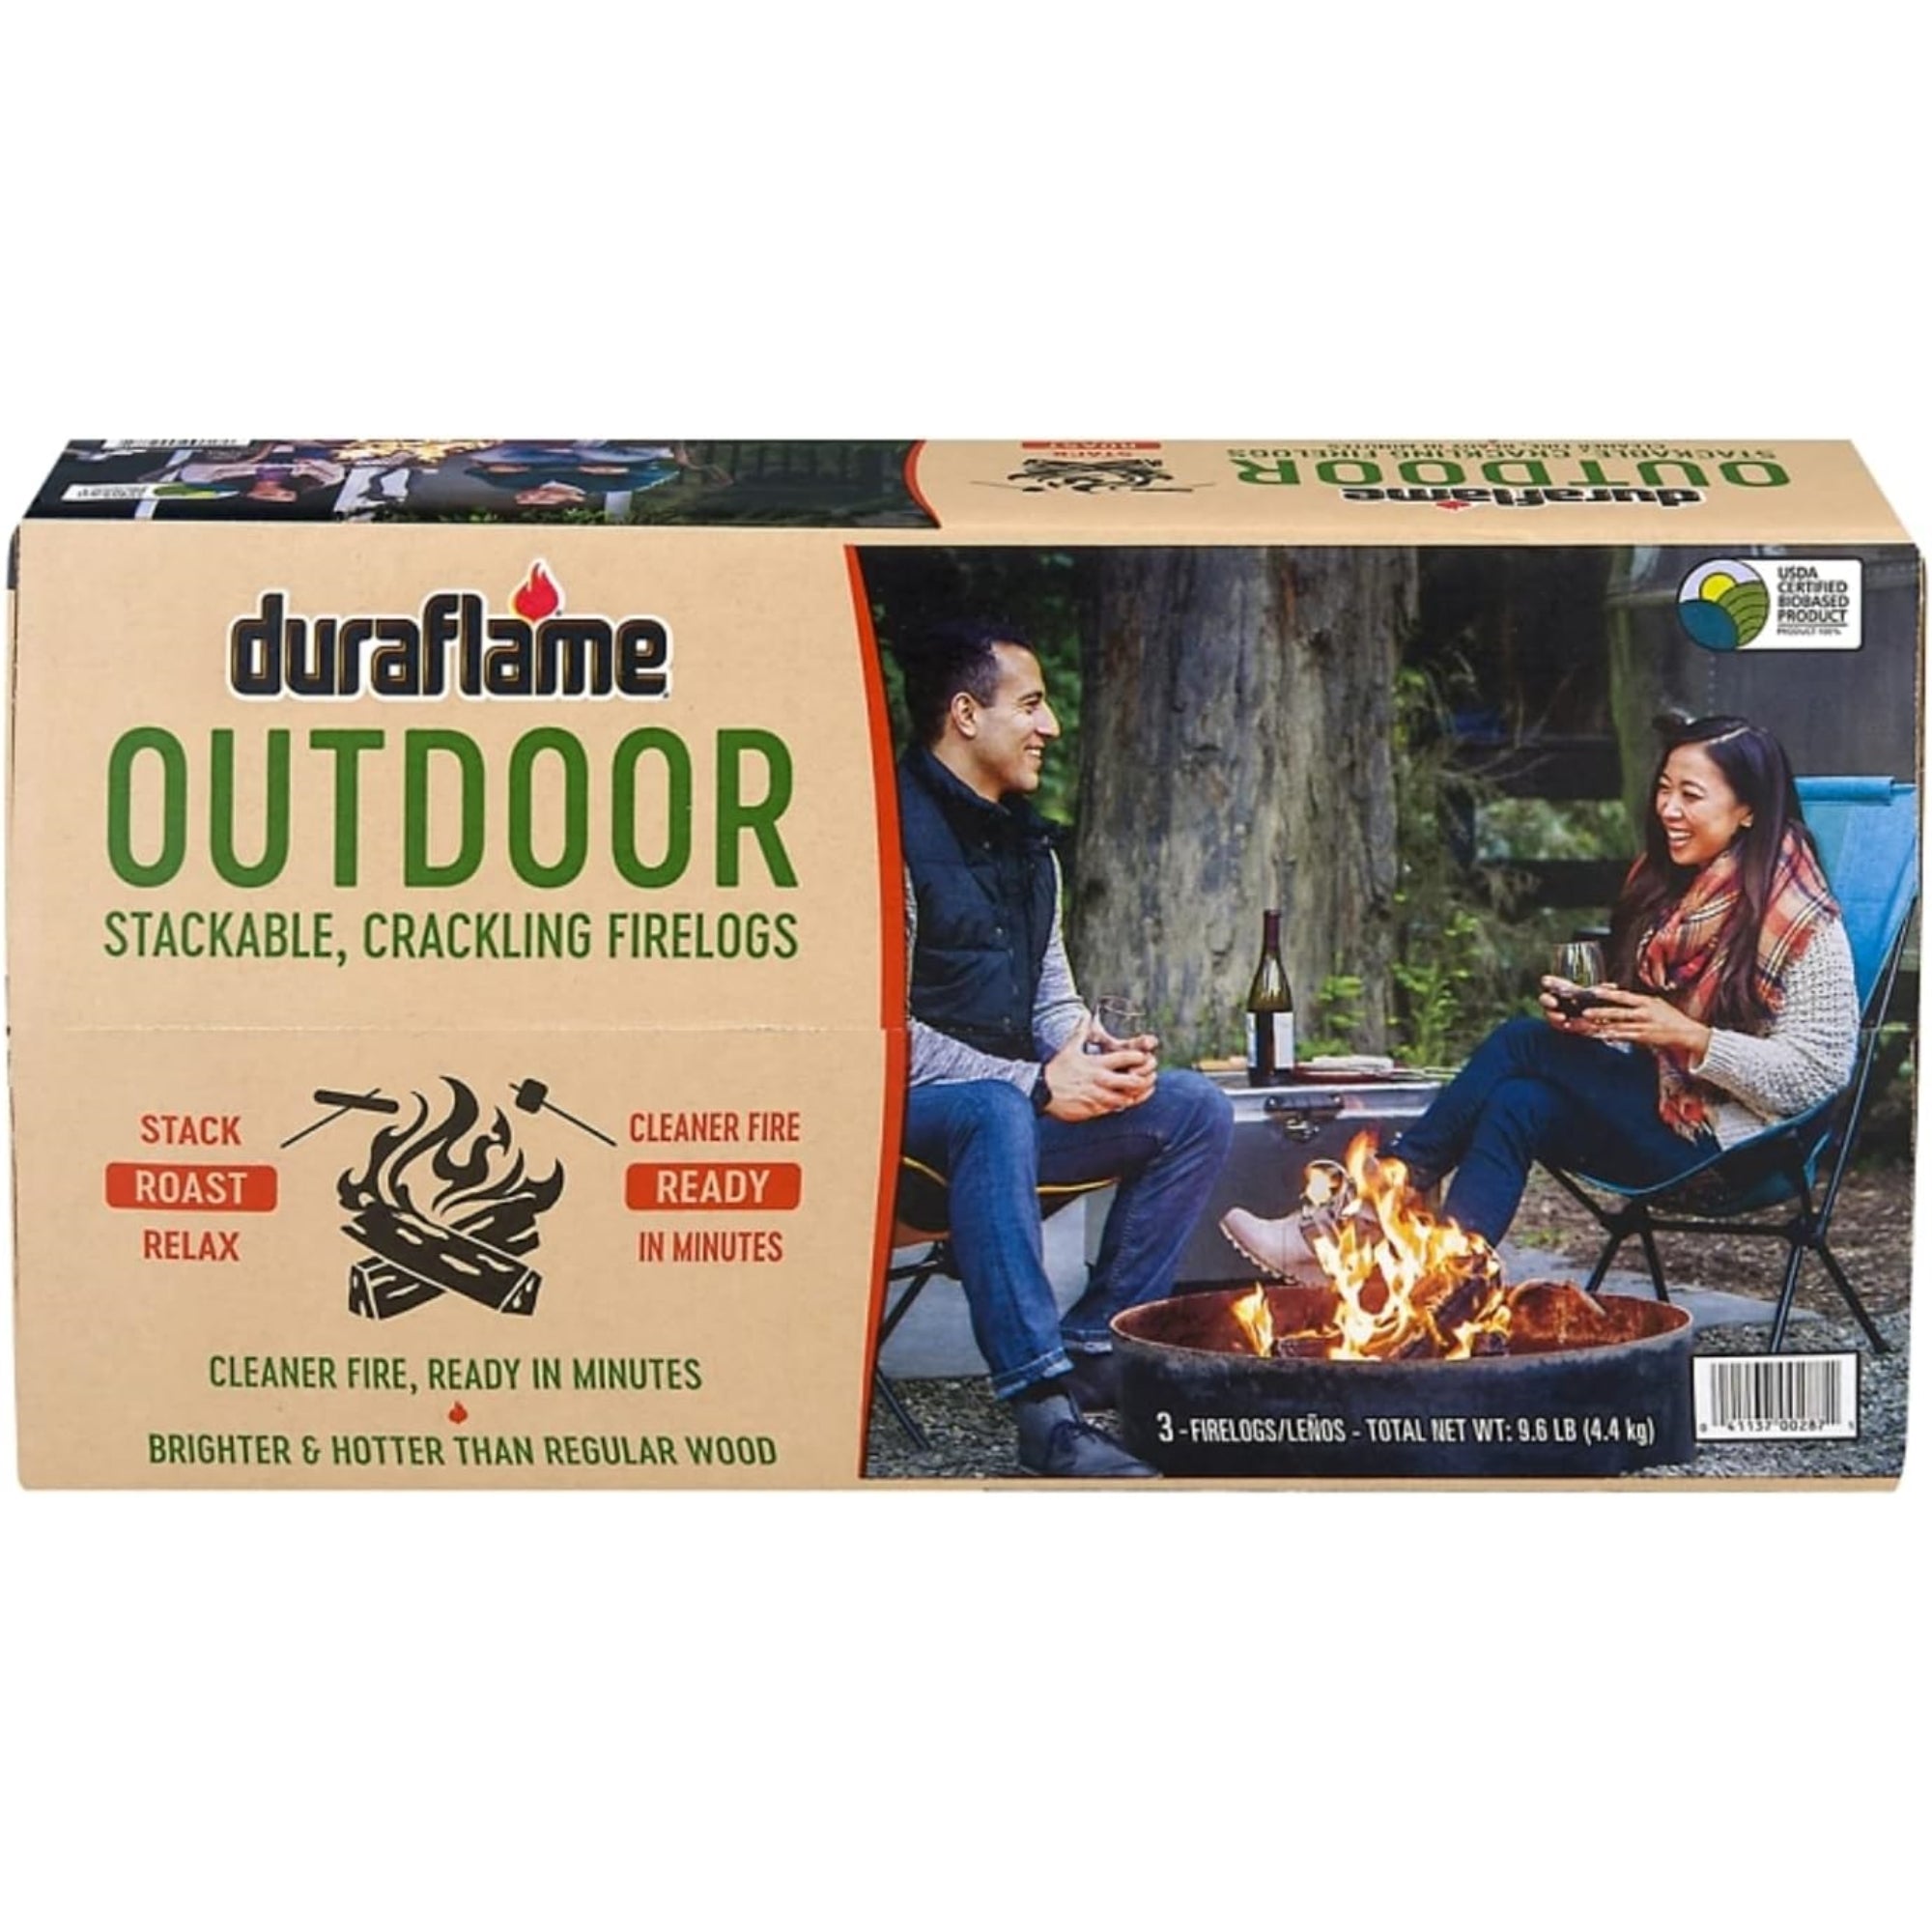 Duraflame Outdoor Stackable Crackling Firelogs, Brighter & Hotter (Pack of 3)